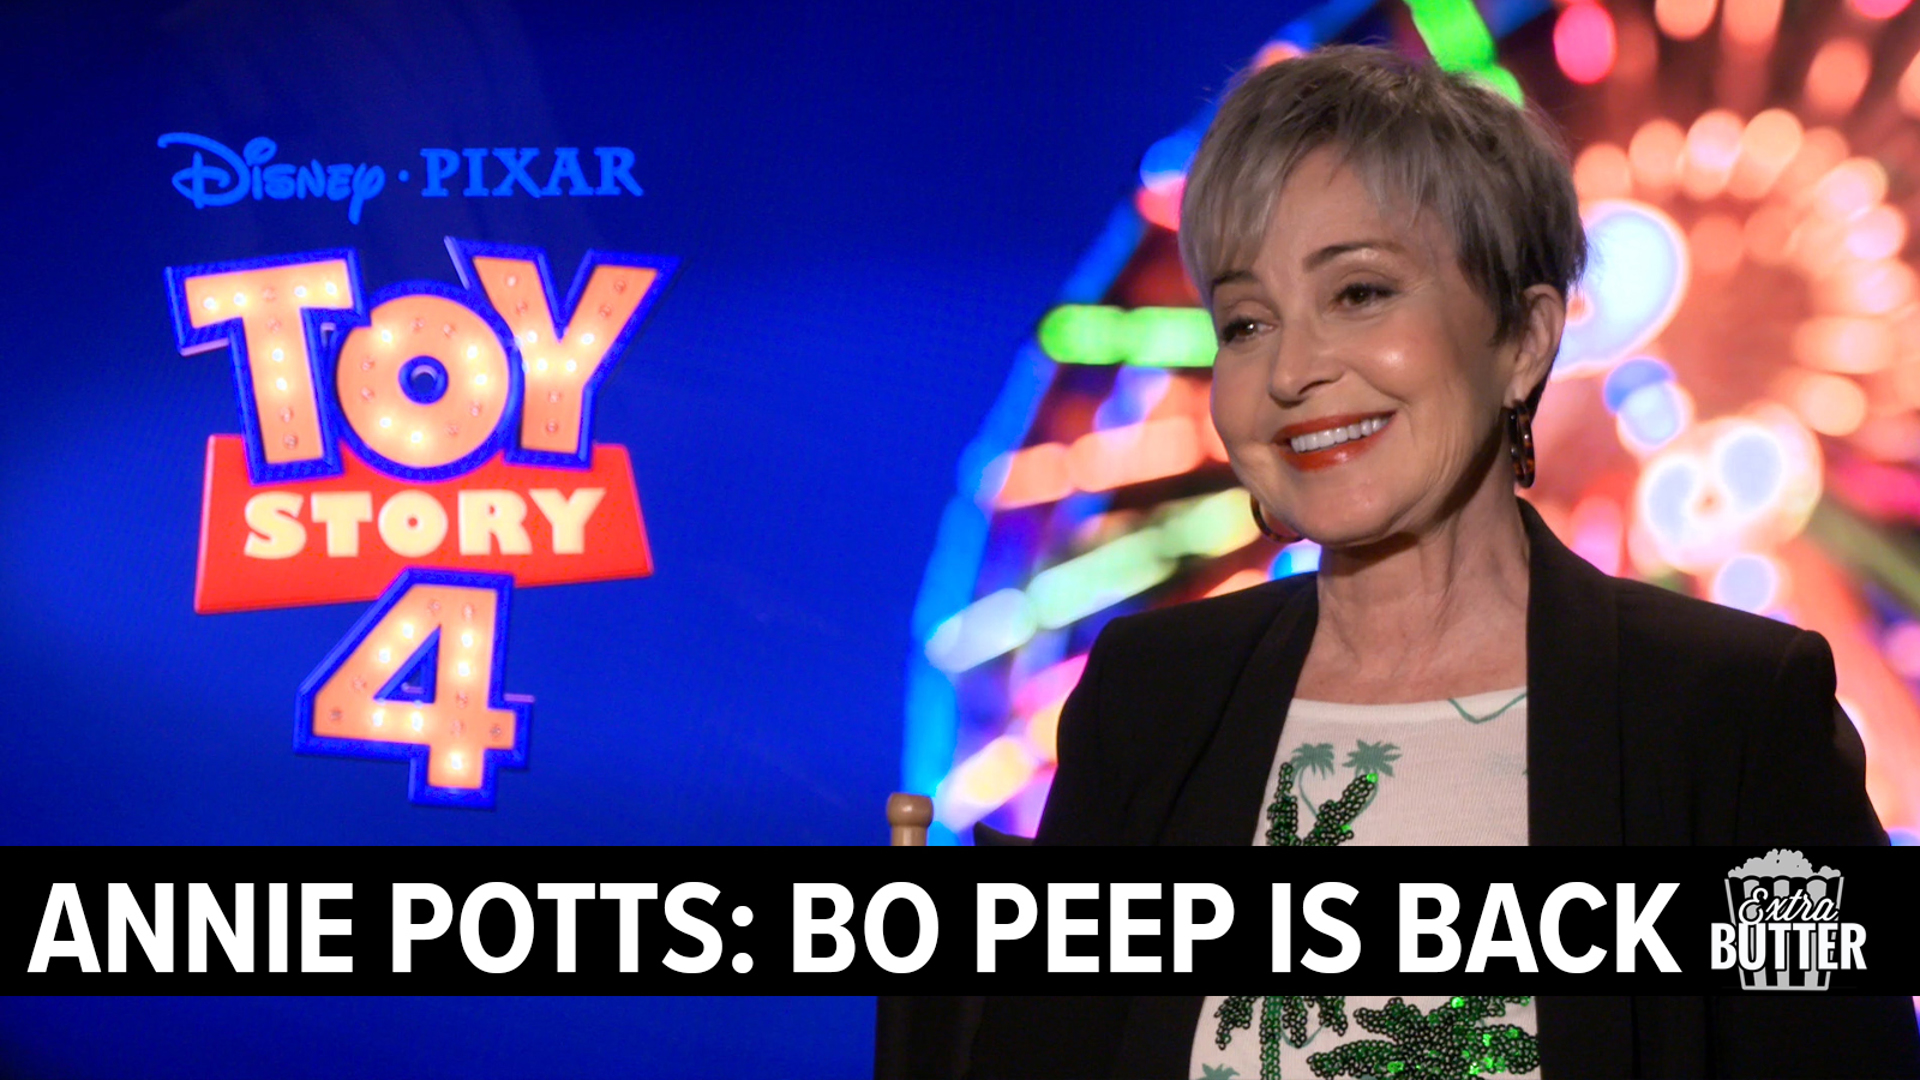 Annie Potts is back in 'Toy Story 4' as Bo Peep makes her return in the Pixar sequel. Annie talks about the new Bo Peep, along with 'Pretty in Pink.' Mark S. Allen also asks her if she is team Woody or team Buzz.